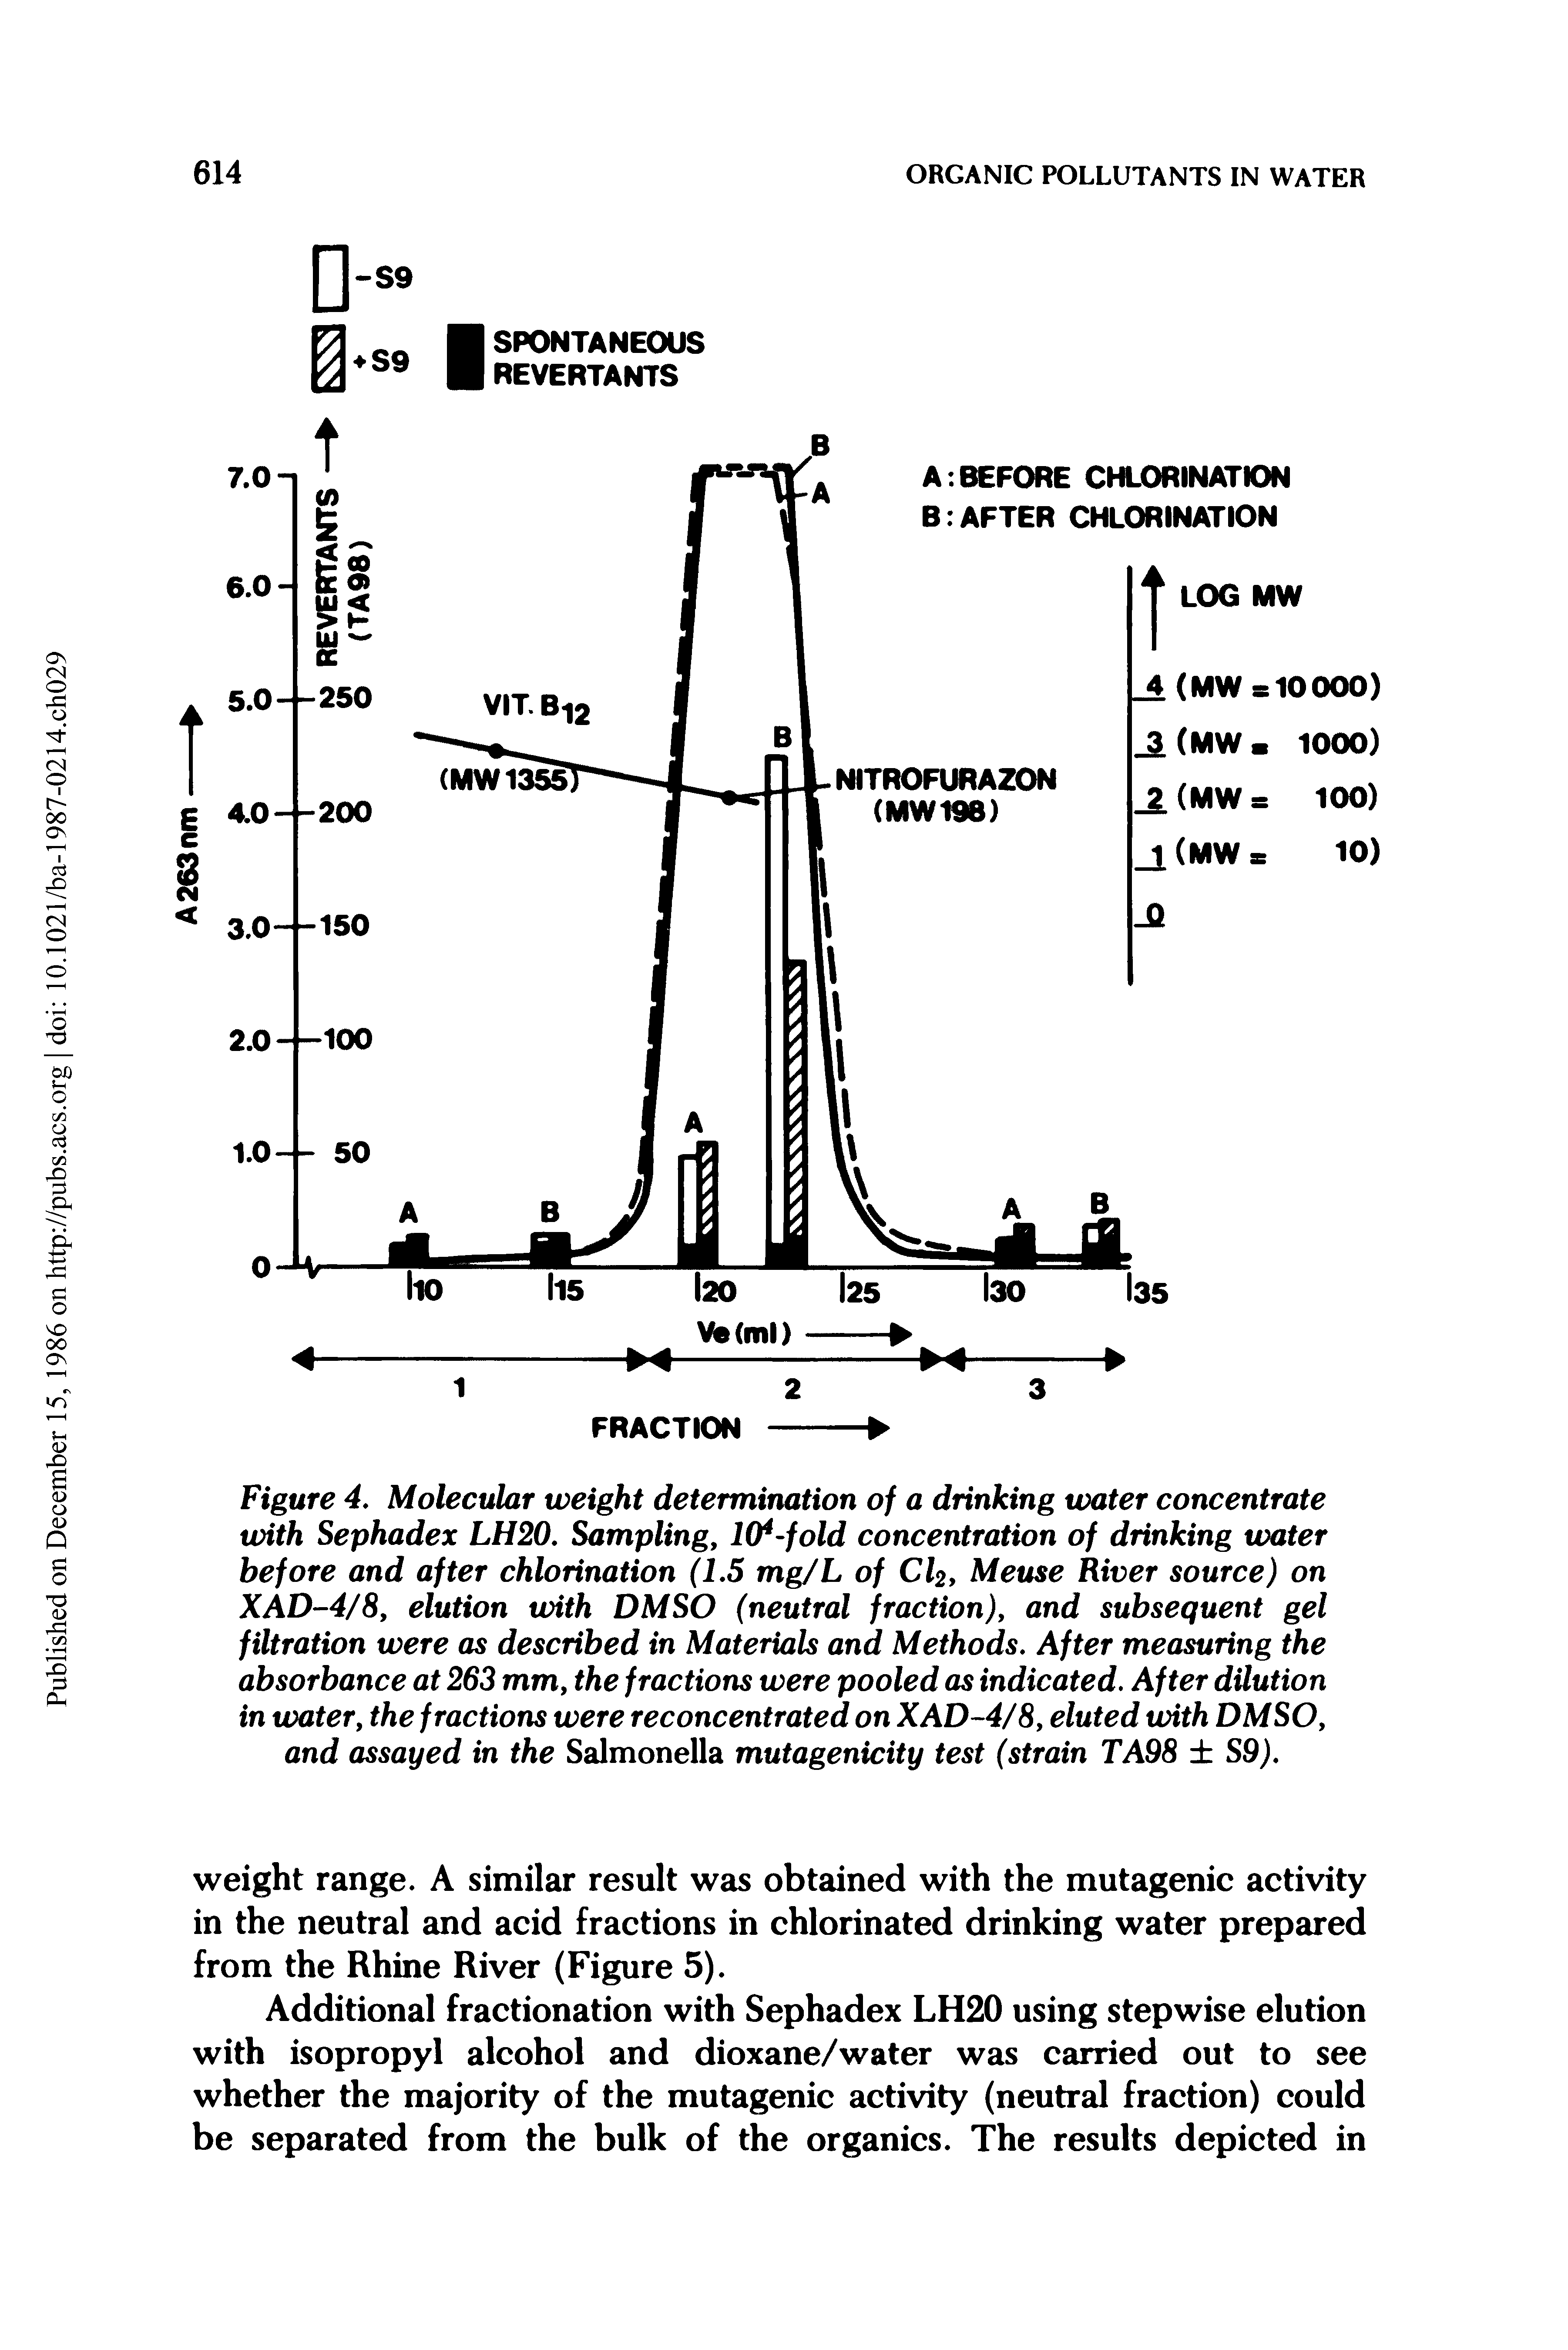 Figure 4. Molecular weight determination of a drinking water concentrate with Sephadex LH20. Sampling, 10 -fold concentration of drinking water before and after chlorination (L5 mg/L of CI2, Meuse River source) on XAD-4/8, elution with DMSO (neutral fraction), and subsequent gel filtration were as described in Materials and Methods. After measuring the absorbance at 263 mm, the fractions were pooled as indicated. After dilution in water, the fractions were reconcentrated on XAD-4/8, eluted with DMSO, and assayed in the Salmonella mutagenicity test (strain TA98 S9).